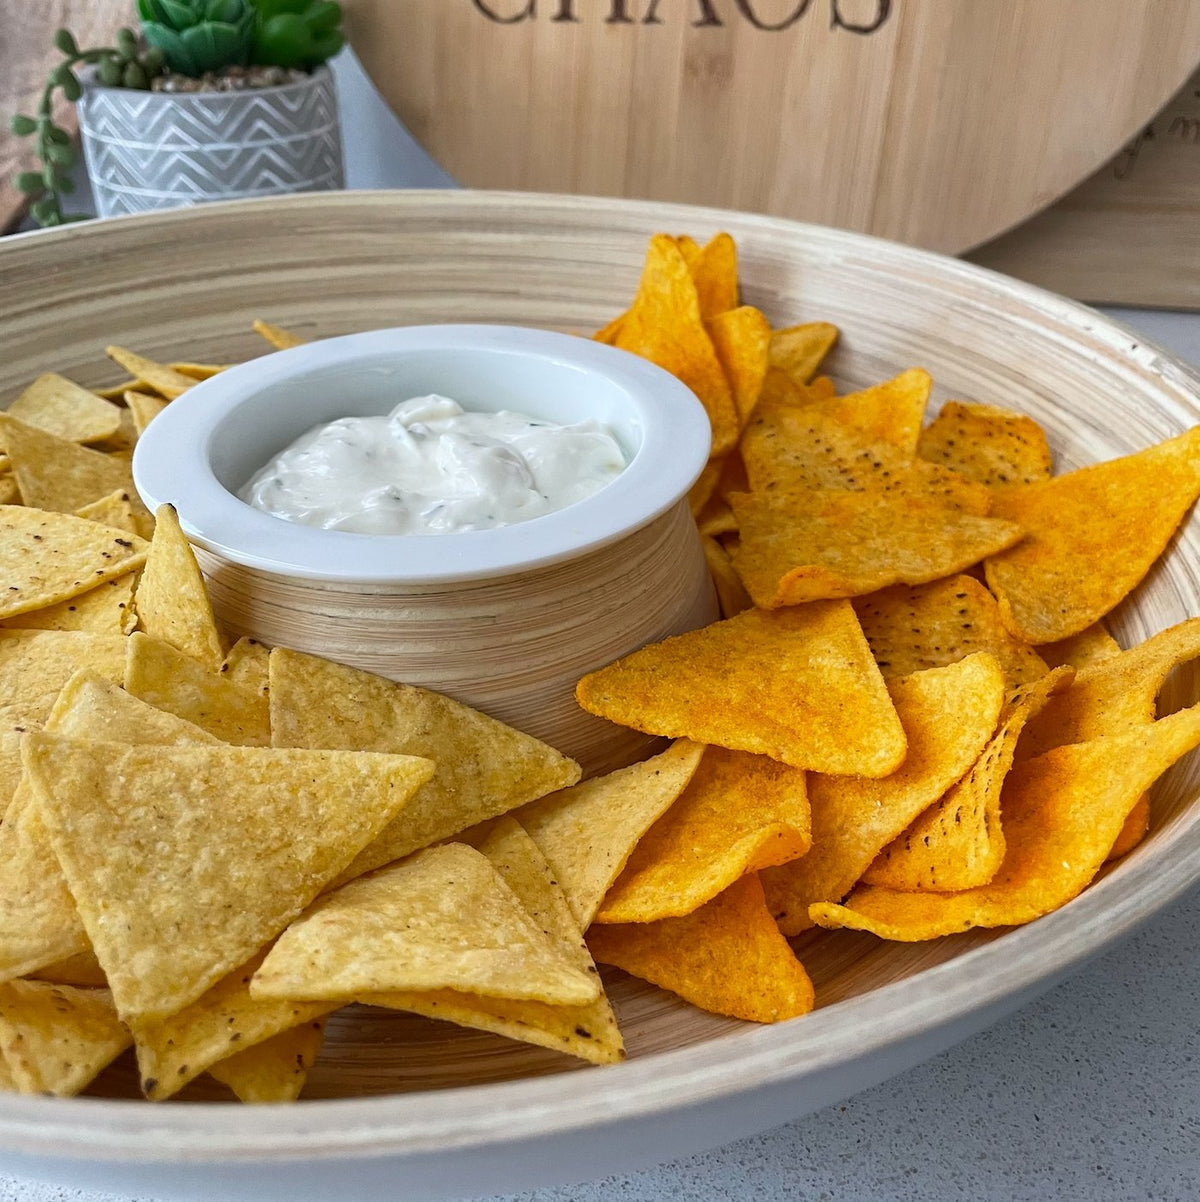 Bamboo Chip 'n' Dip bowl filled with doritos crisps and dip, on kitchen bench top